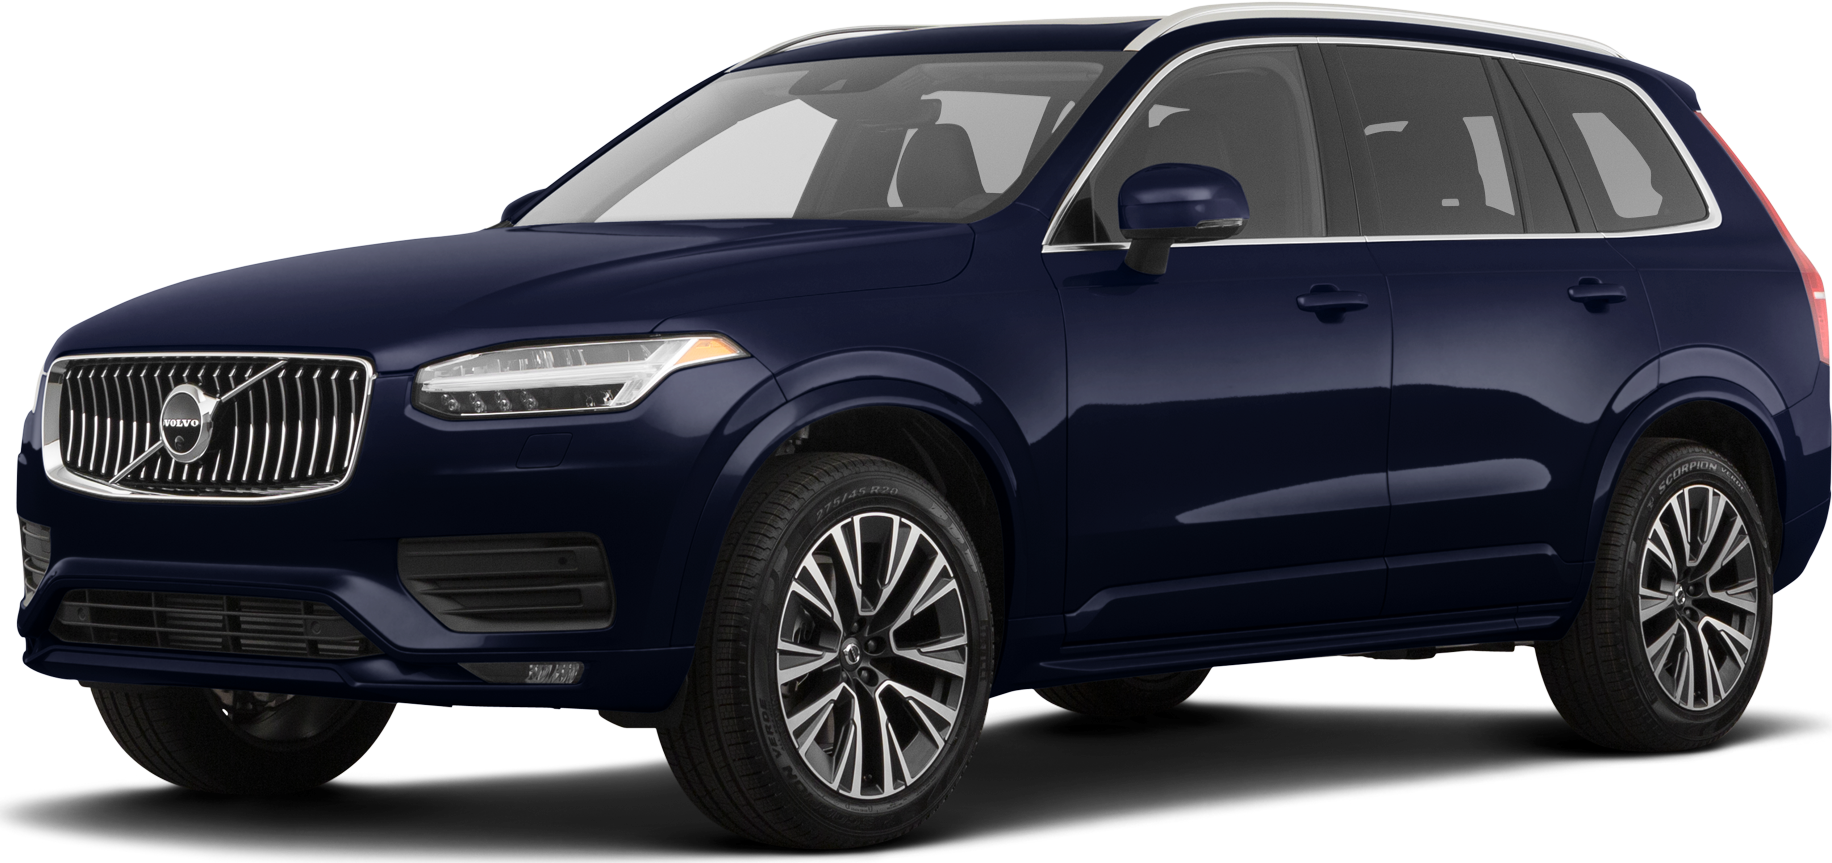 2020 Volvo XC90 Price, Value, Ratings & Reviews | Kelley Blue Book